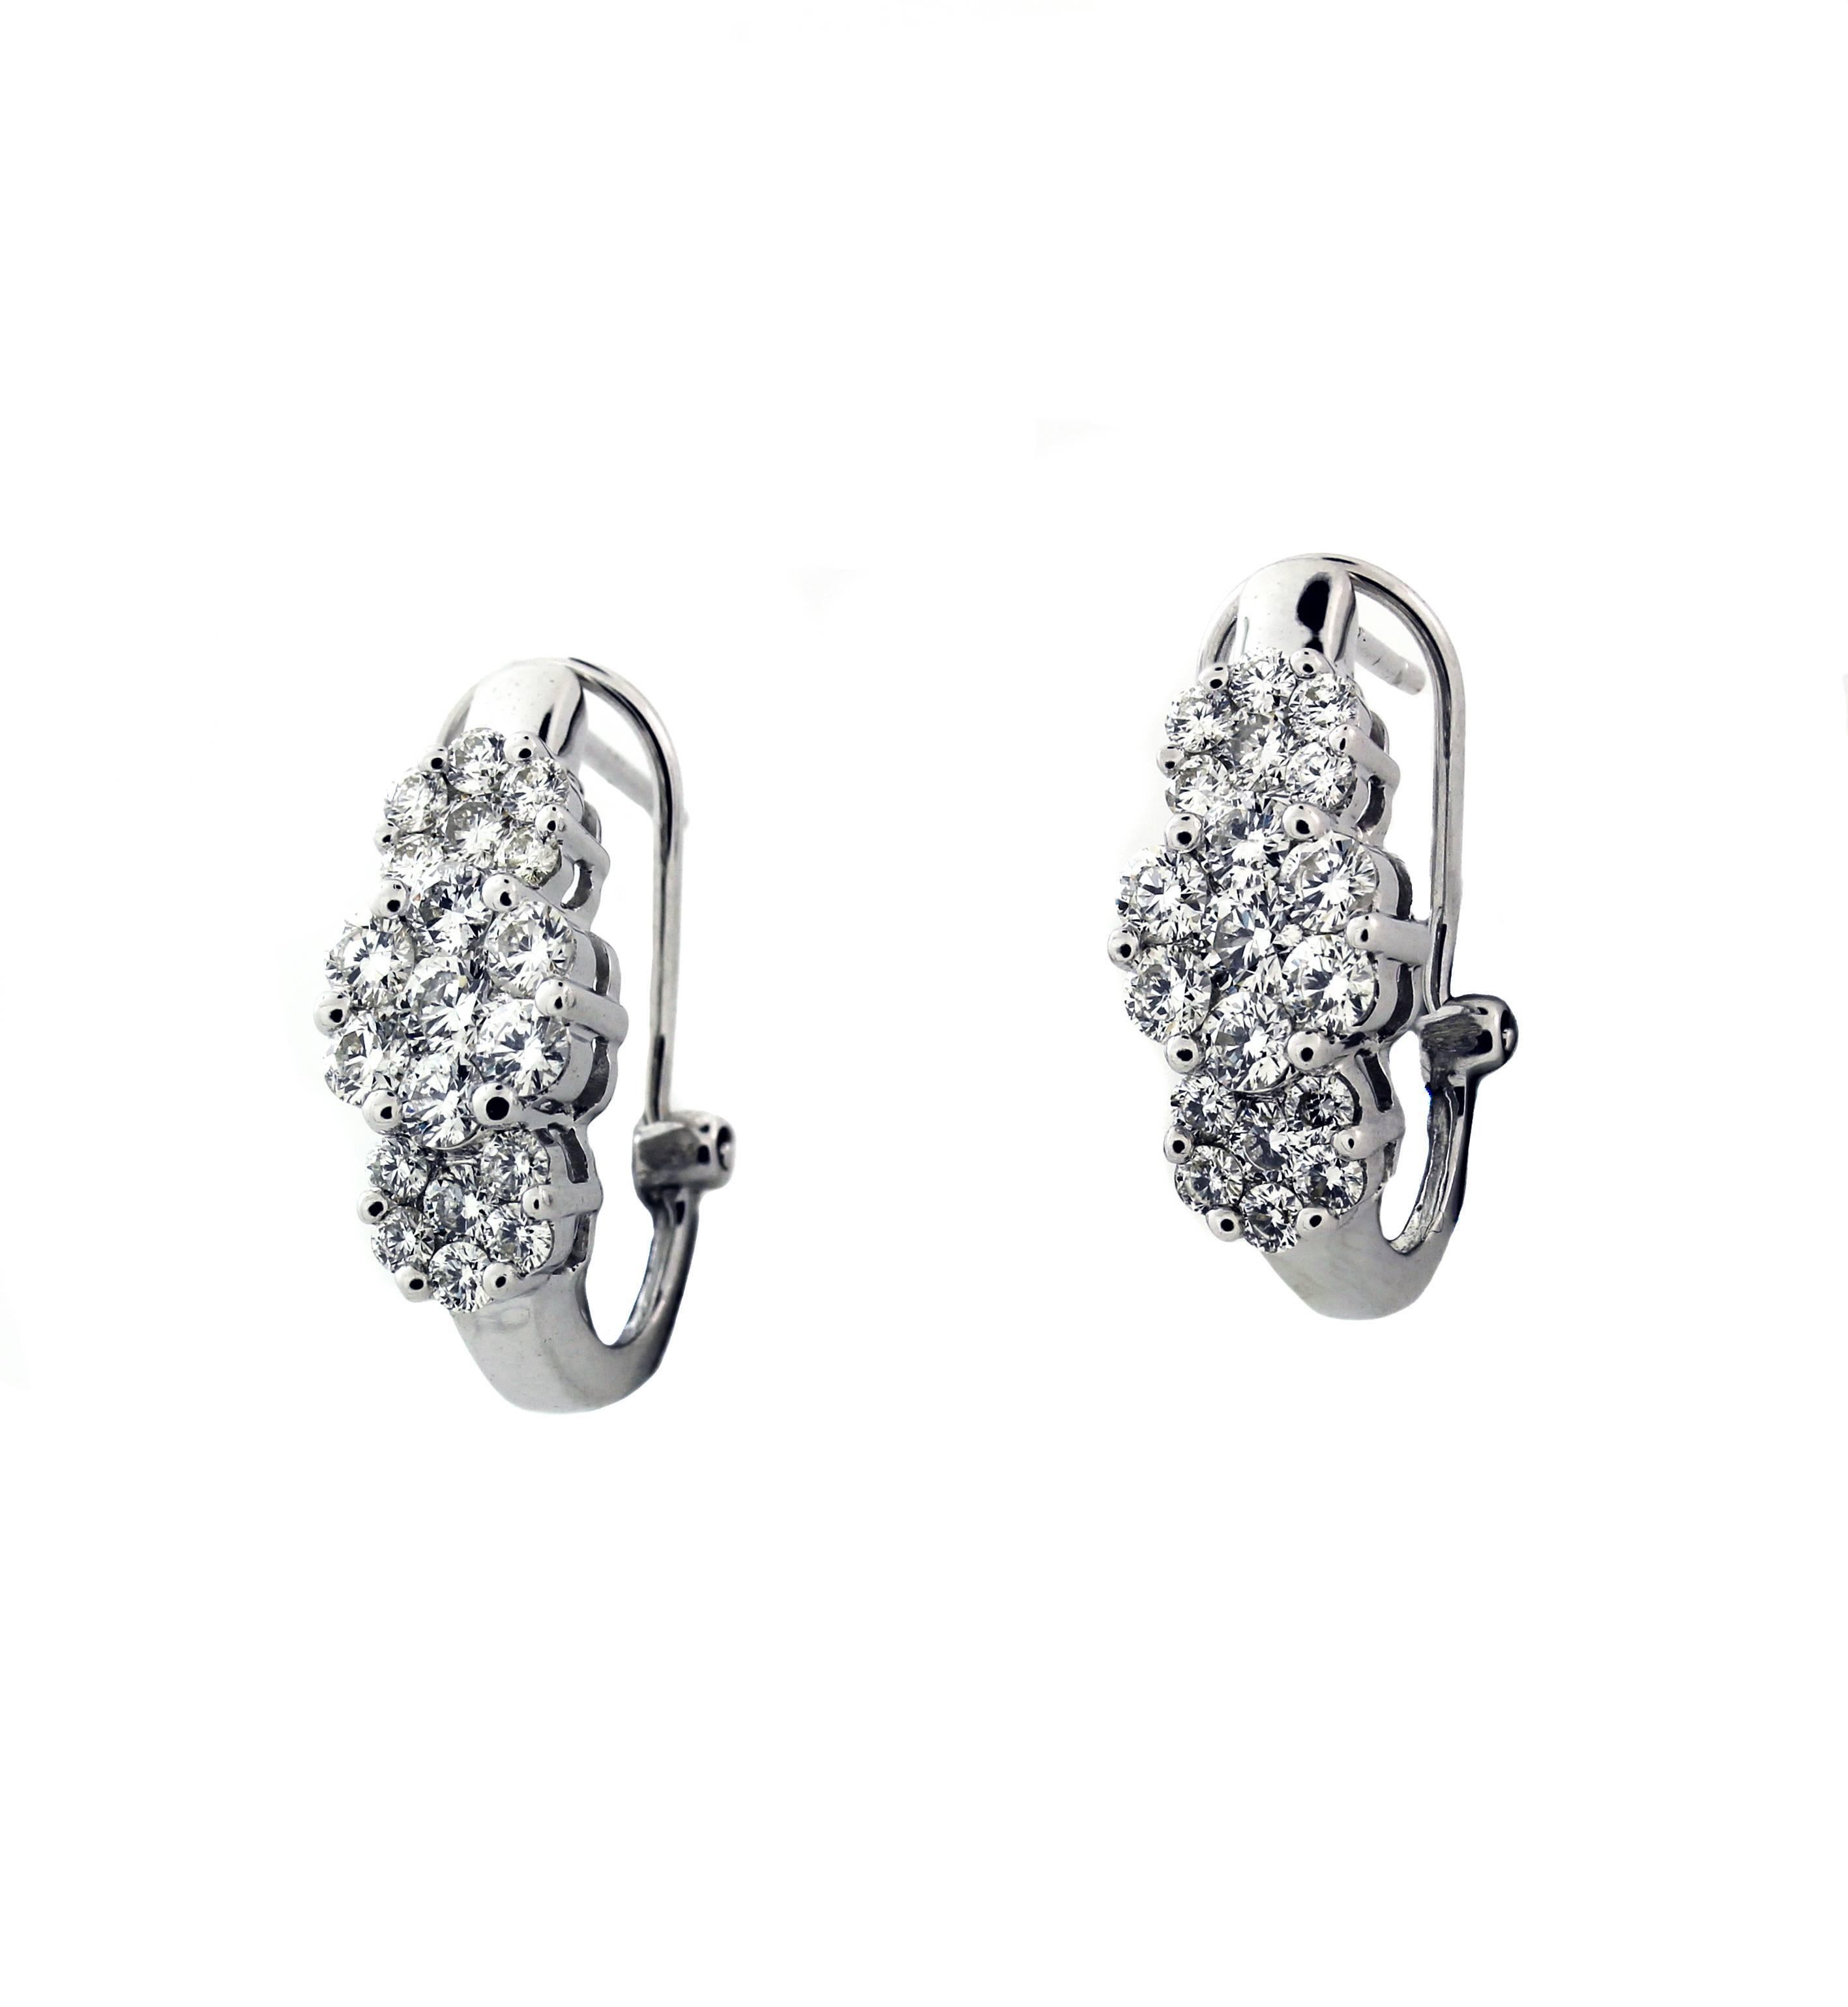 14K White gold earrings with diamond clusters

Apprx. 2.00 carat G color, VS clarity diamonds. 38 diamonds total

Earrings are 0.8 inch in length x 0.3 inch width

Post omega backs

Made in USA